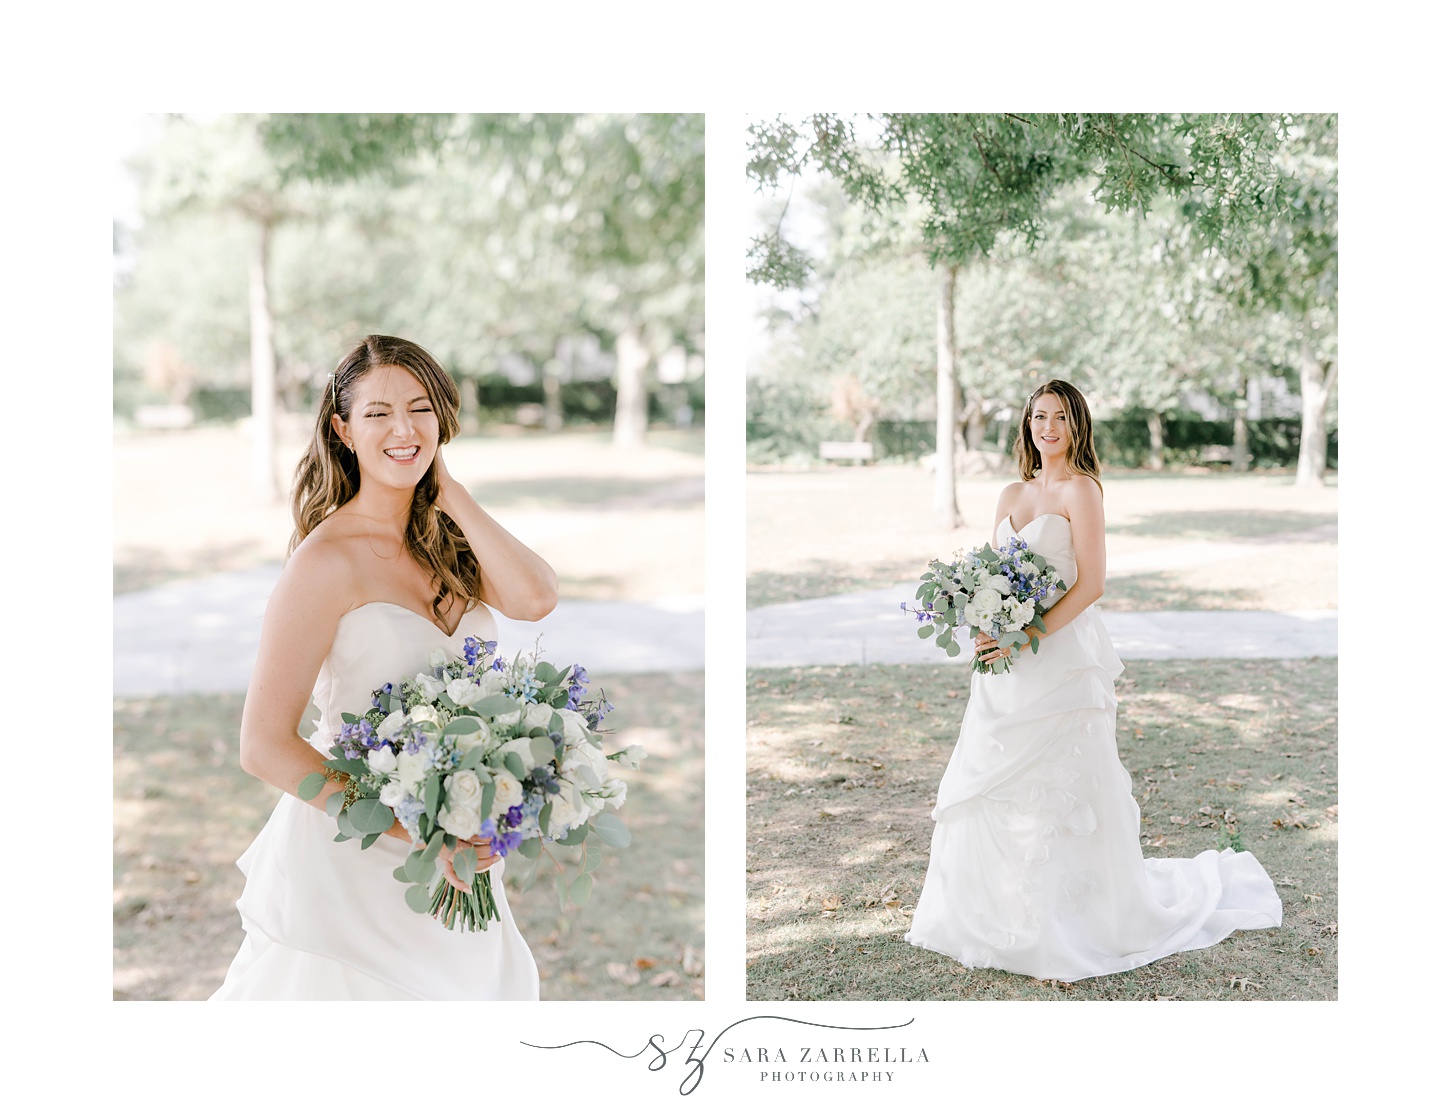 bride poses in park with bouquet of purple and white flowers